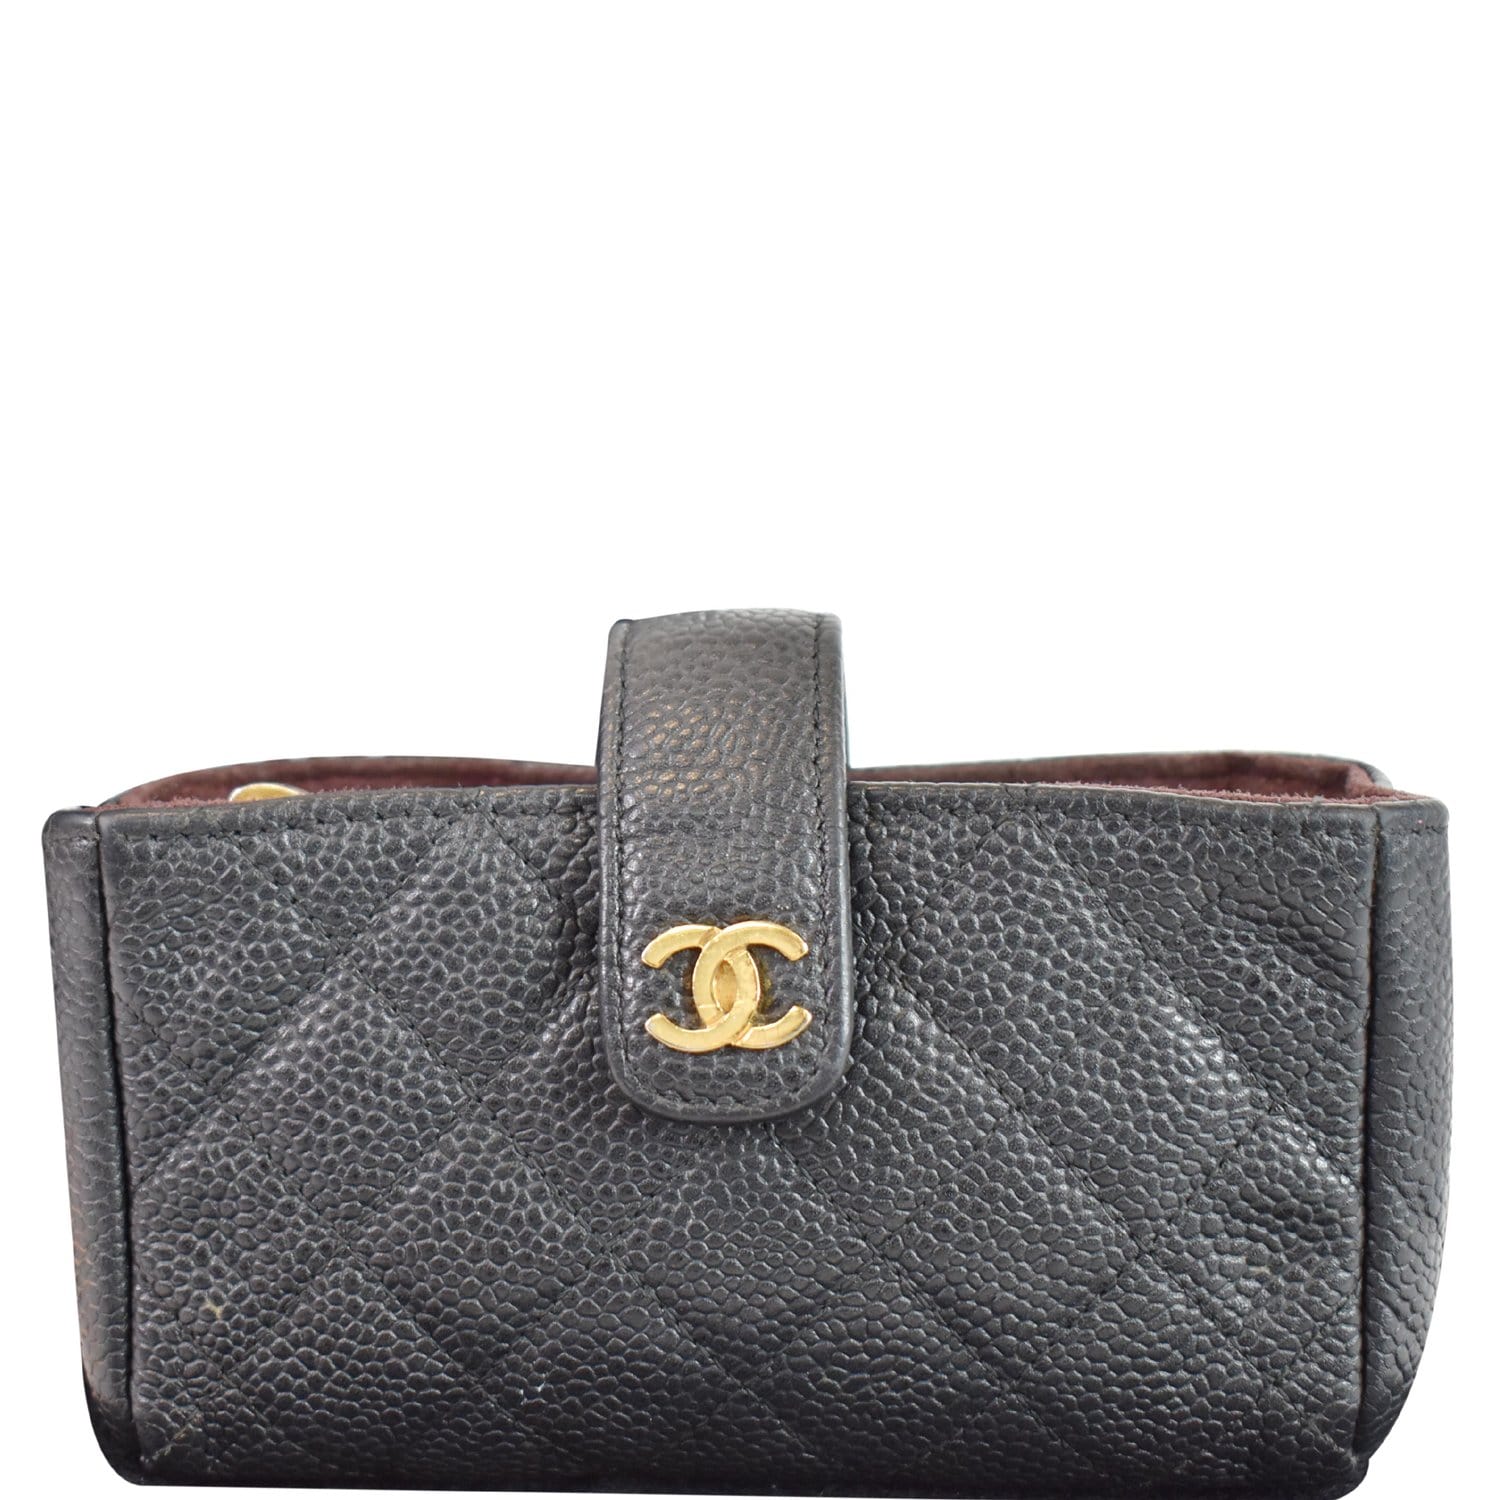 CHANEL Black Leather Quilted CC Belt Bag Pouch Phone Purse Chain